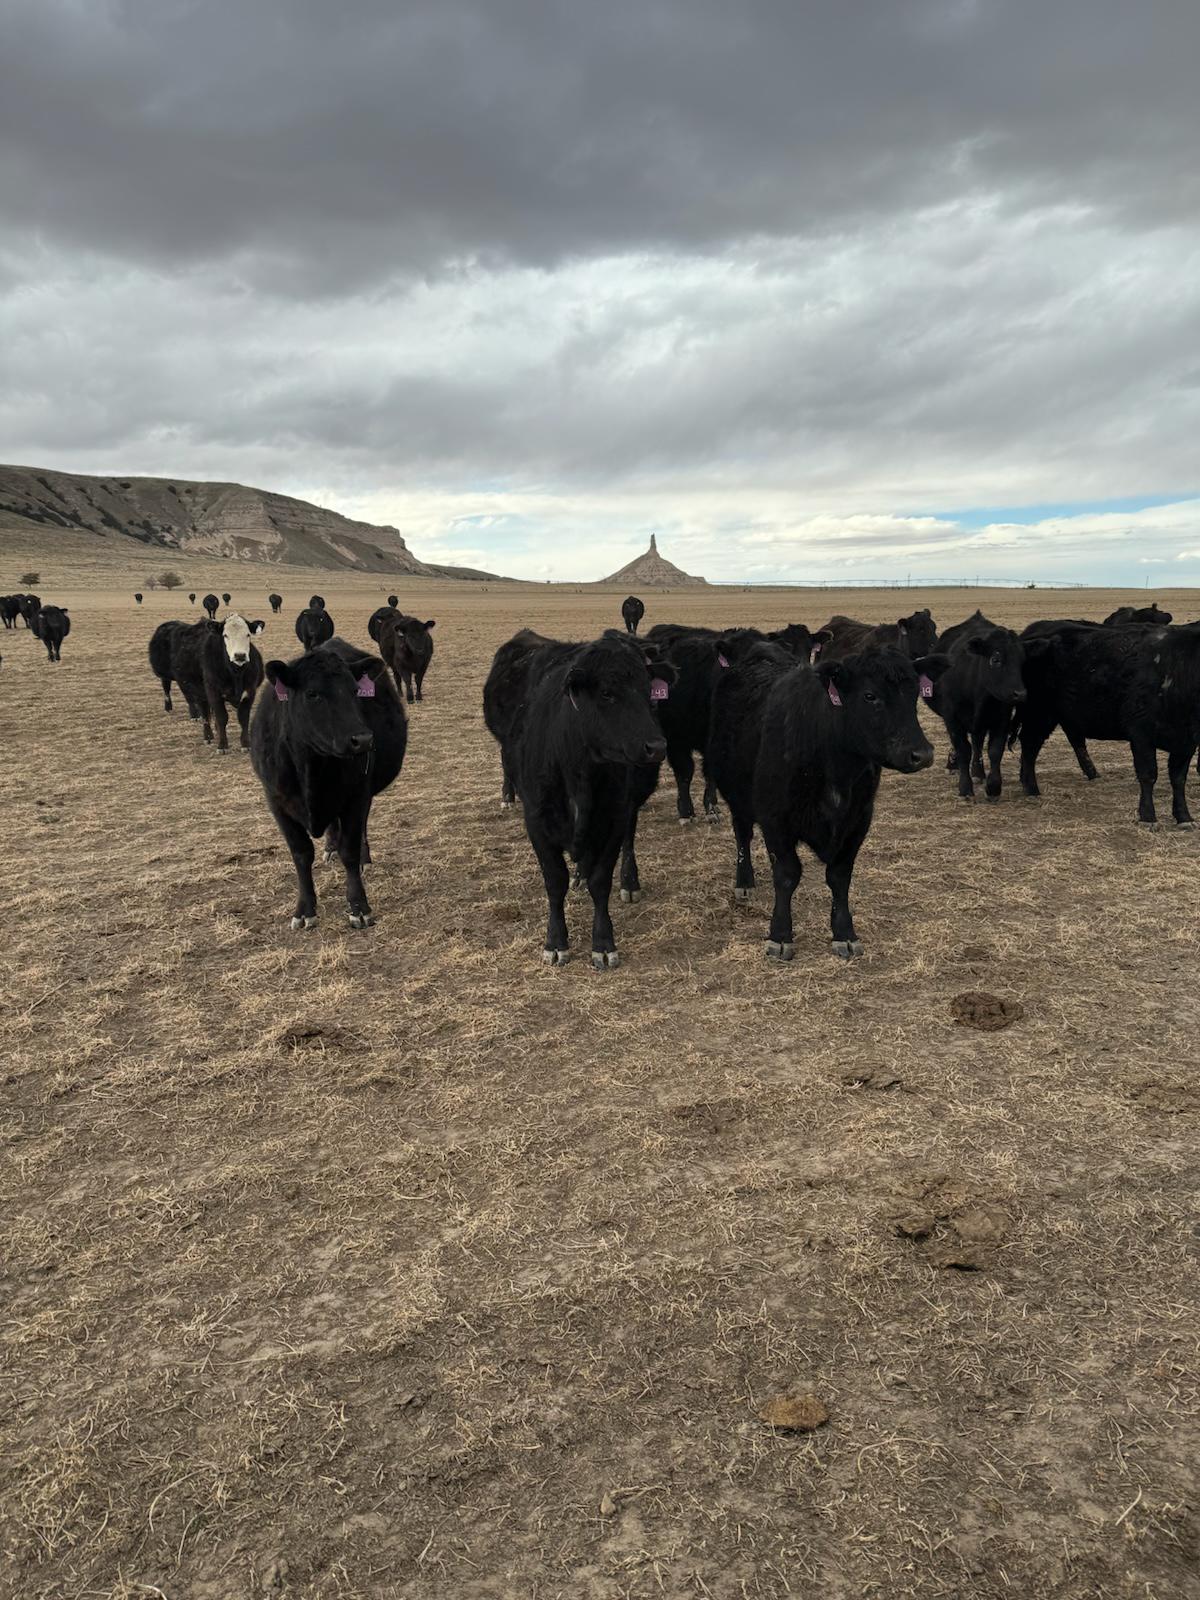 It's National Ag Week - drop us a picture of where you are in Agriculture this time of year. Are you calving? Are you getting anxious for spring planting? Here's one from feeding time.